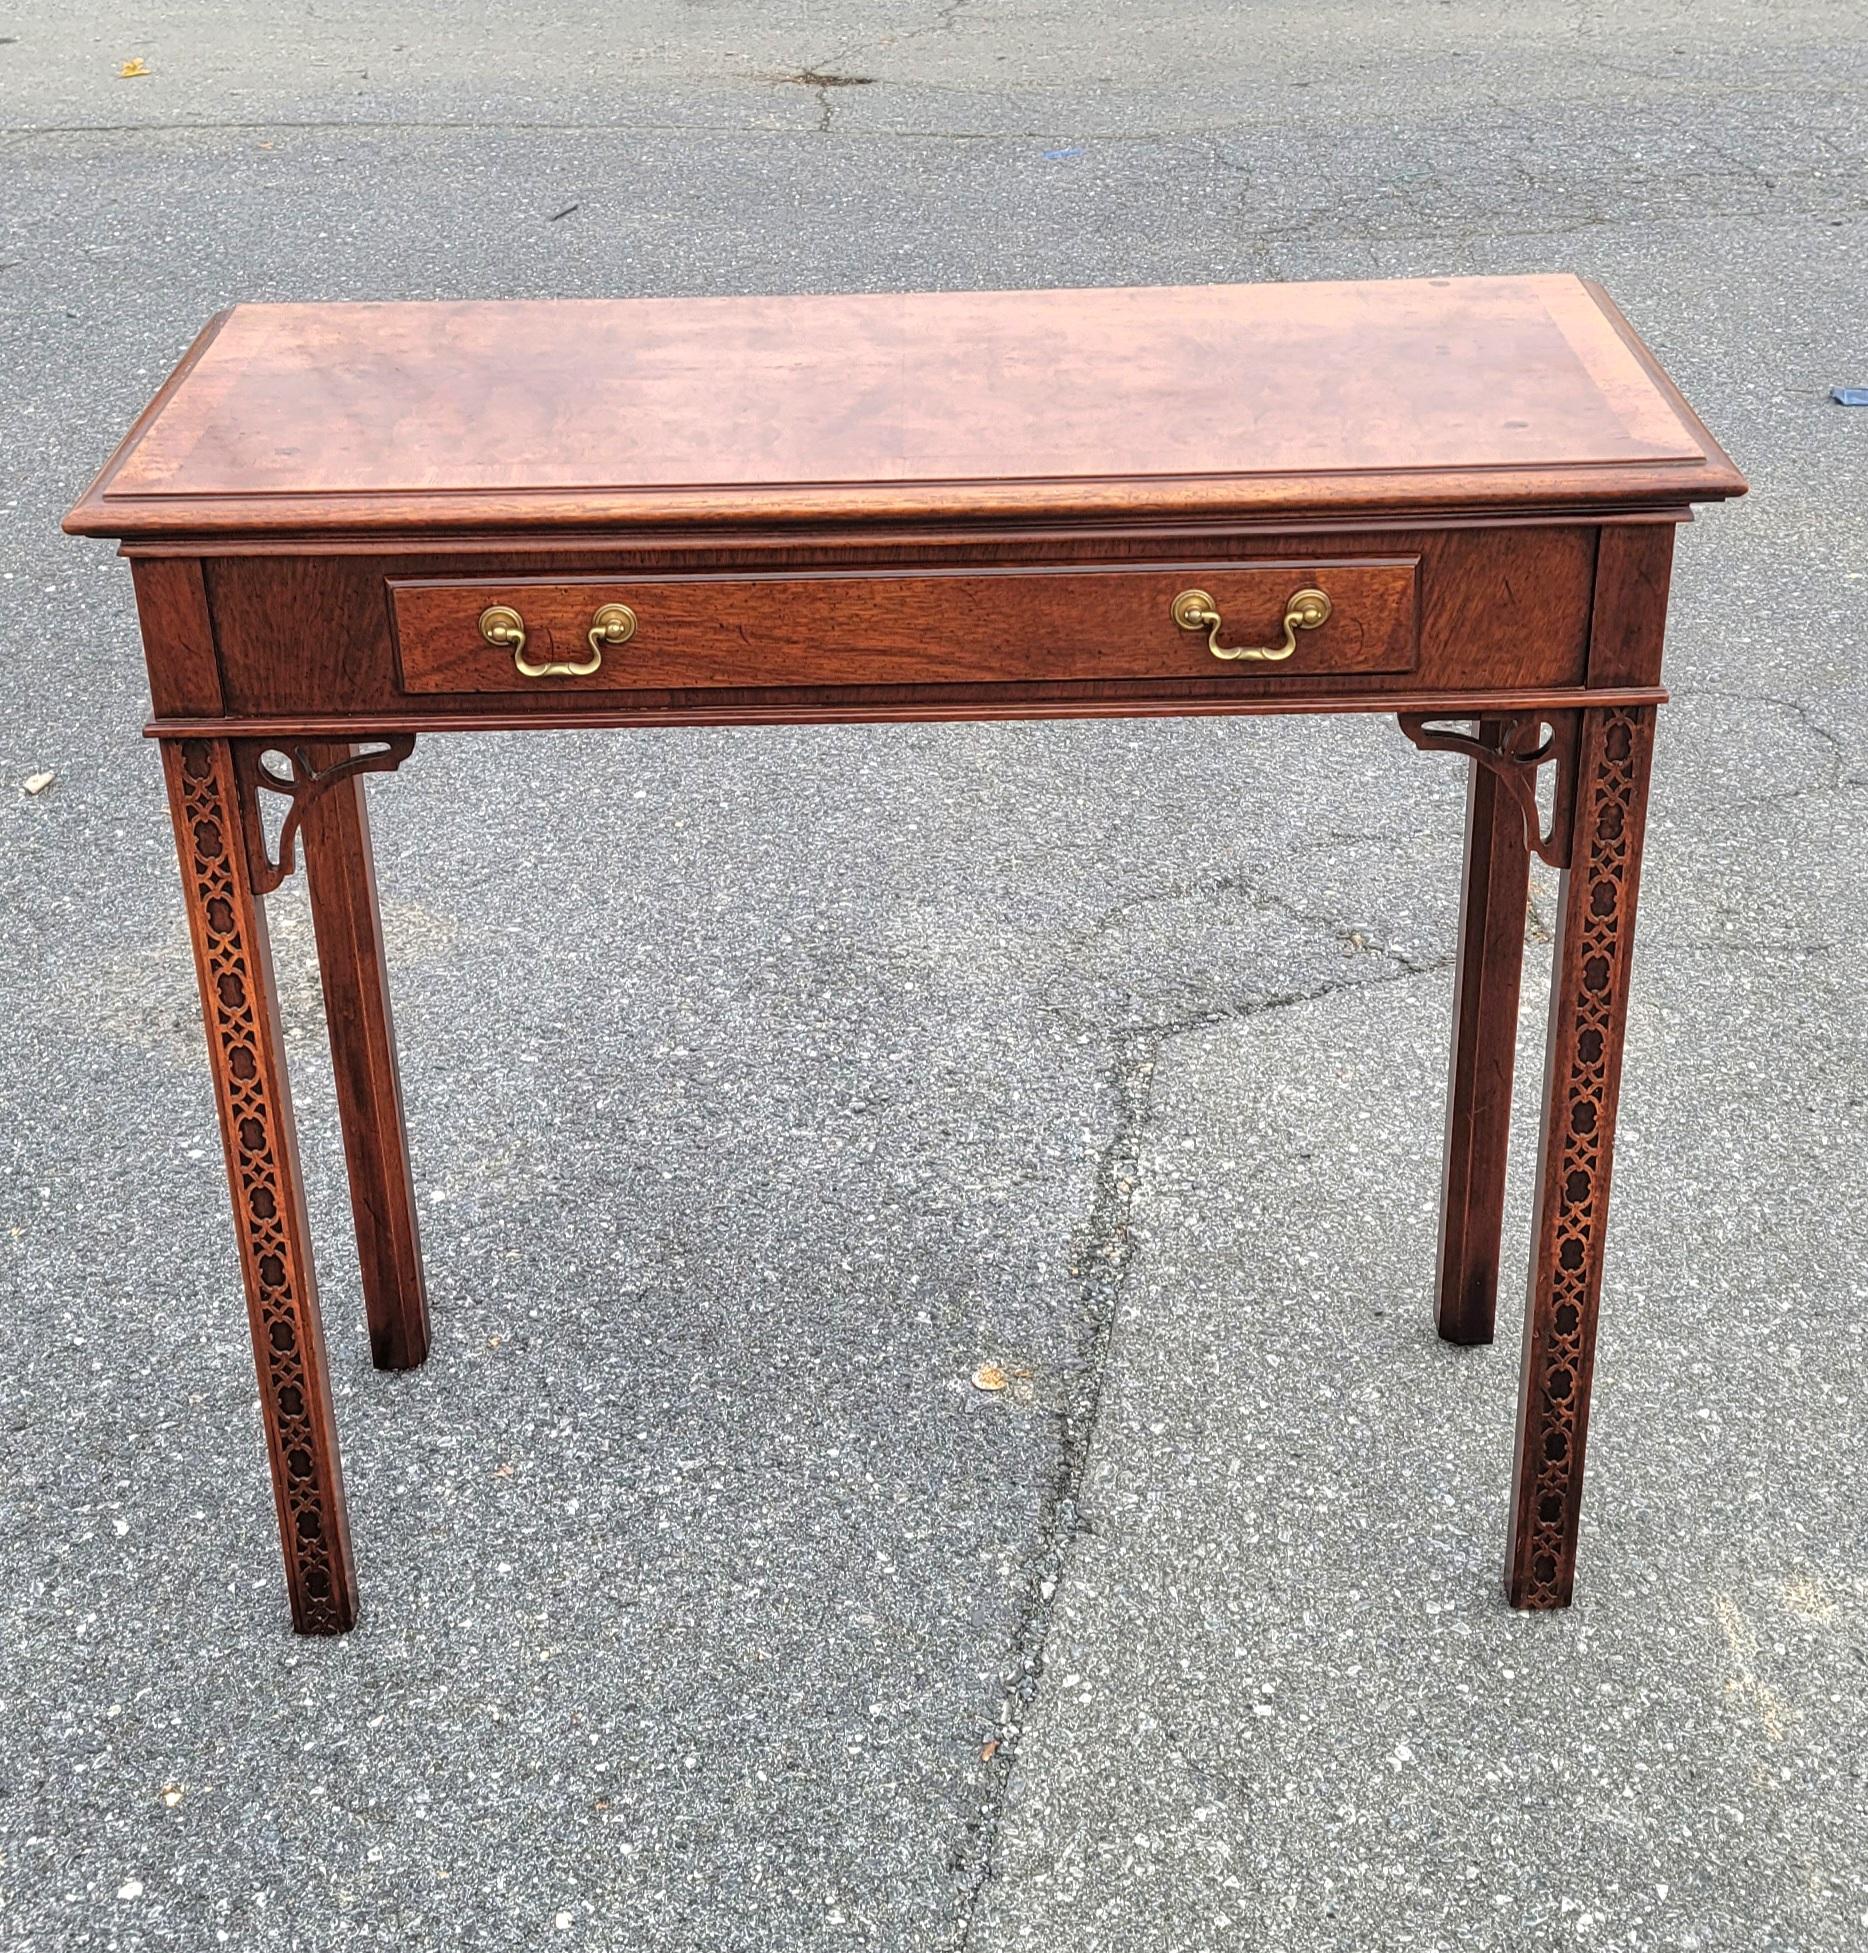 1970s Chippendale Walnut Burl Console Table with Fretwork and Banded Top For Sale 9